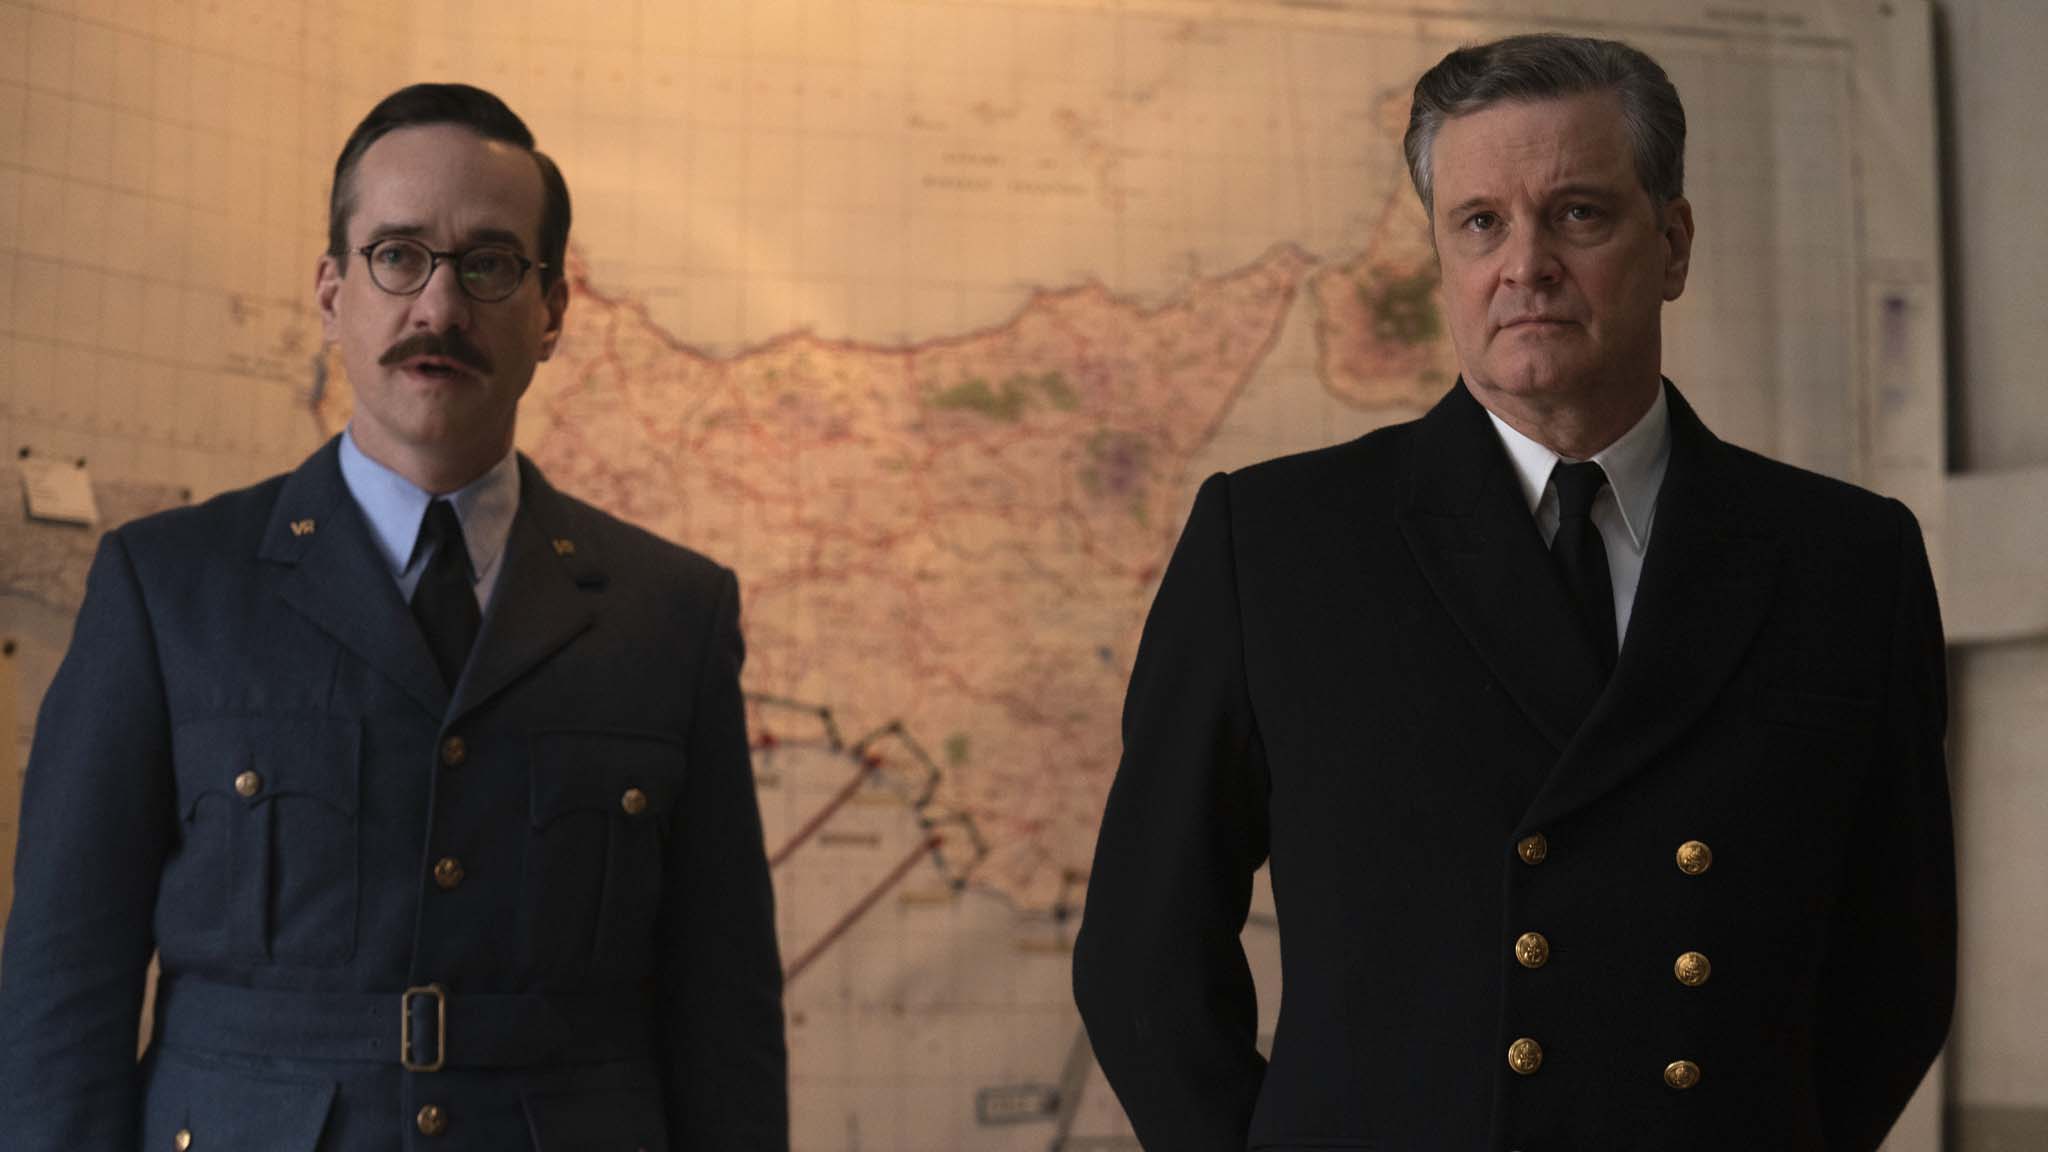 Get tickets to Operation Mincemeat premiere in London